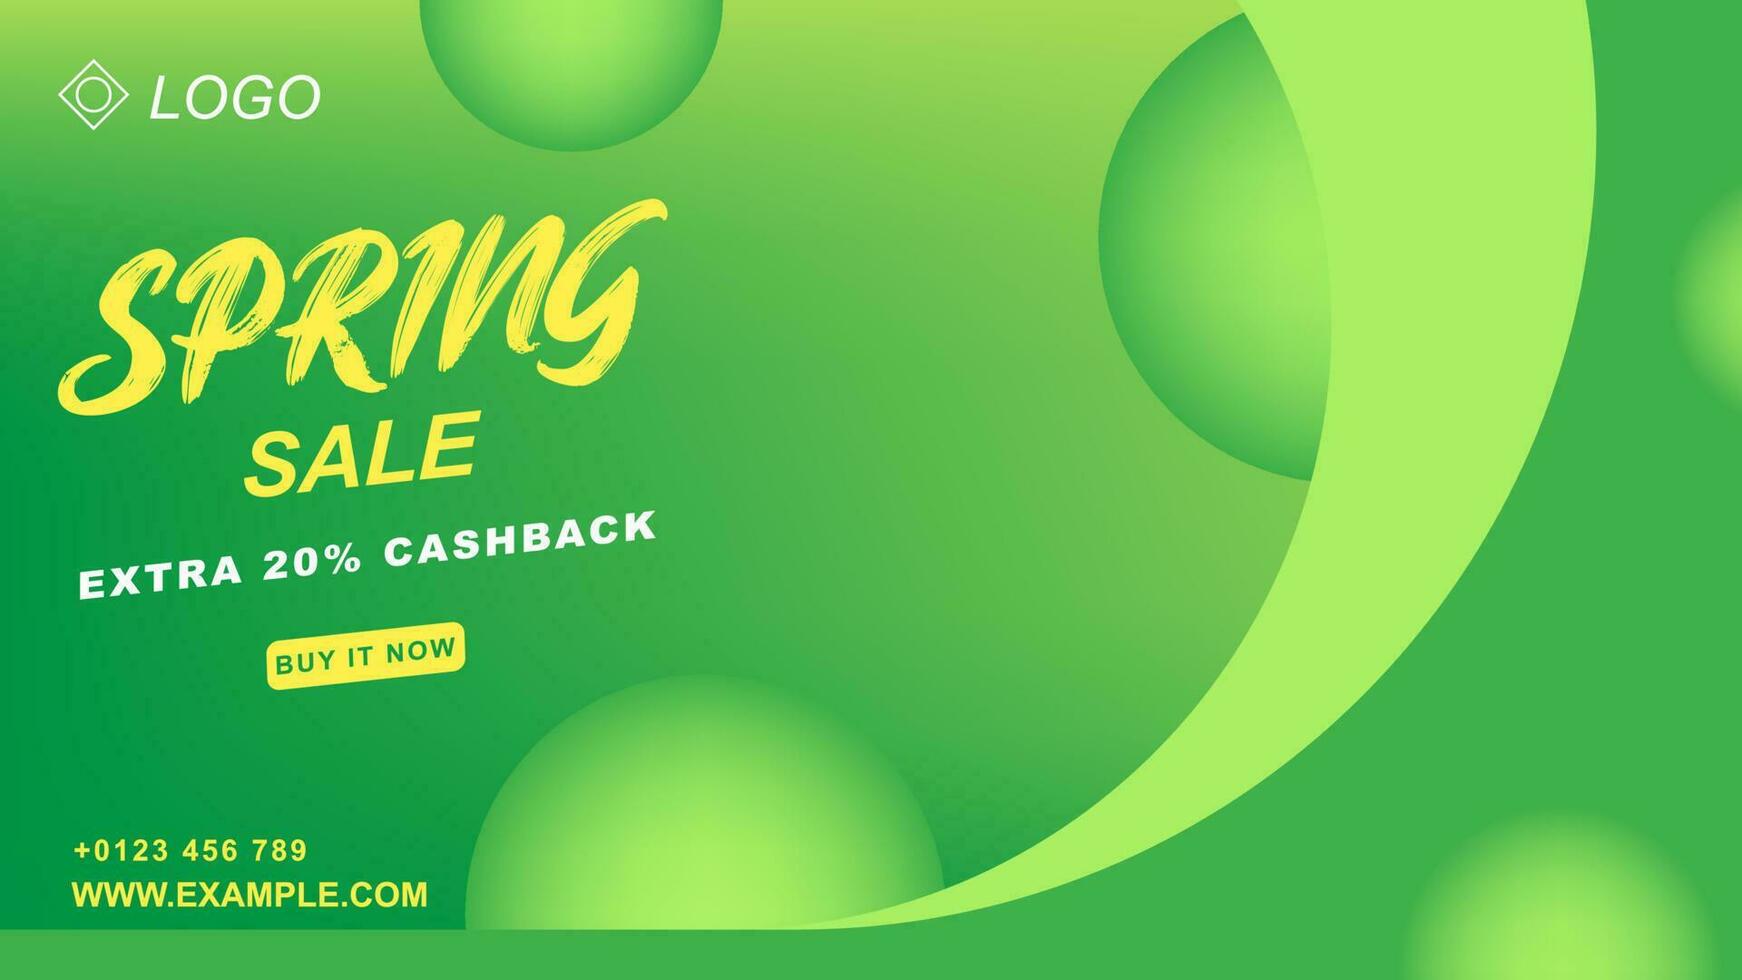 spring sale promotion banner design template in green color suitable for sports, fashion and other promotions vector